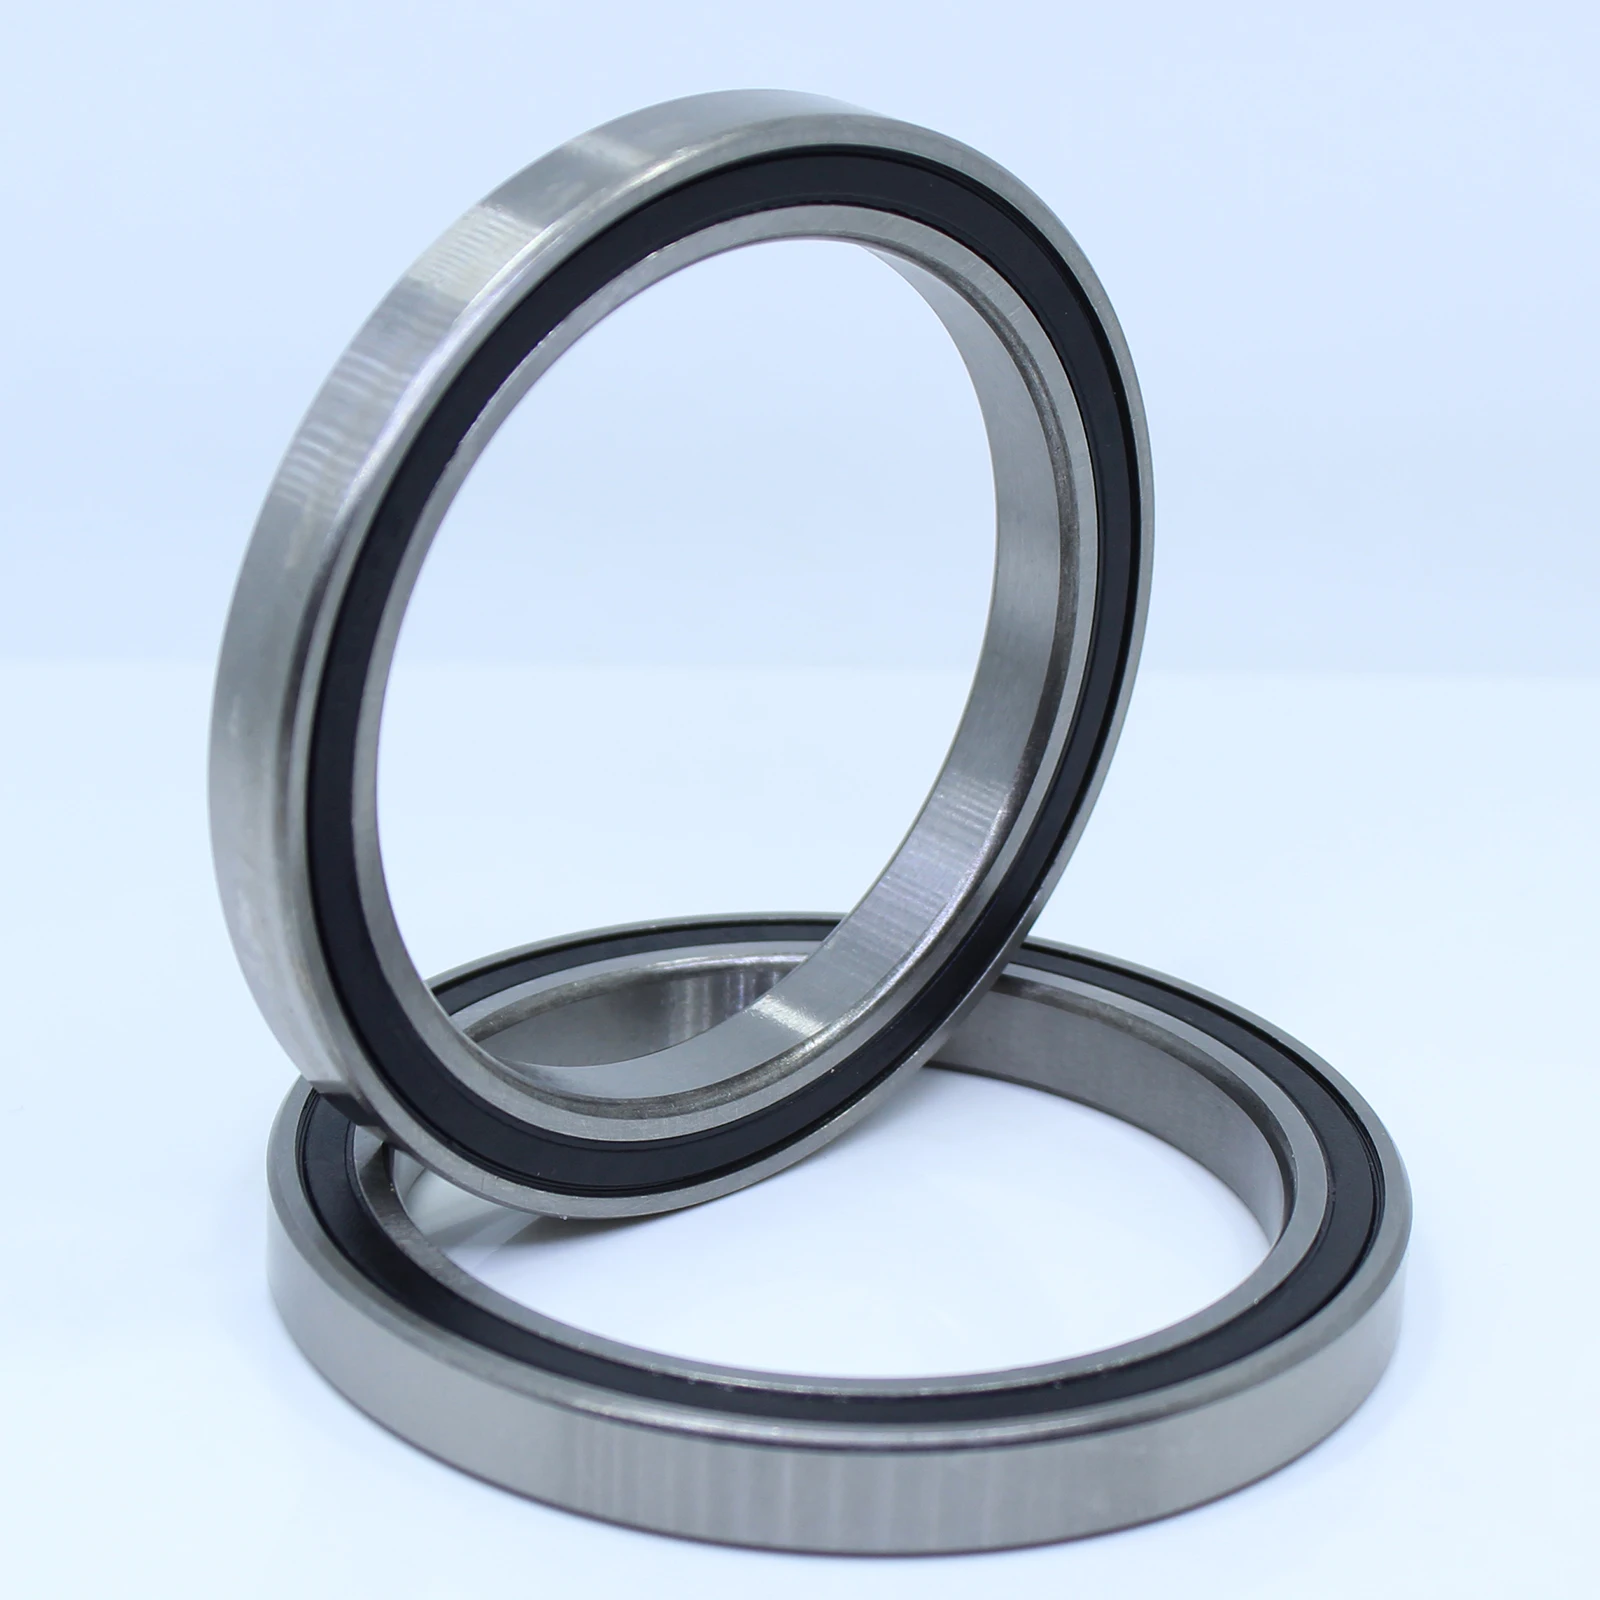 Radial Ball Bearing 6815-2RS With 2 Rubber Seals 75x95x10mm 